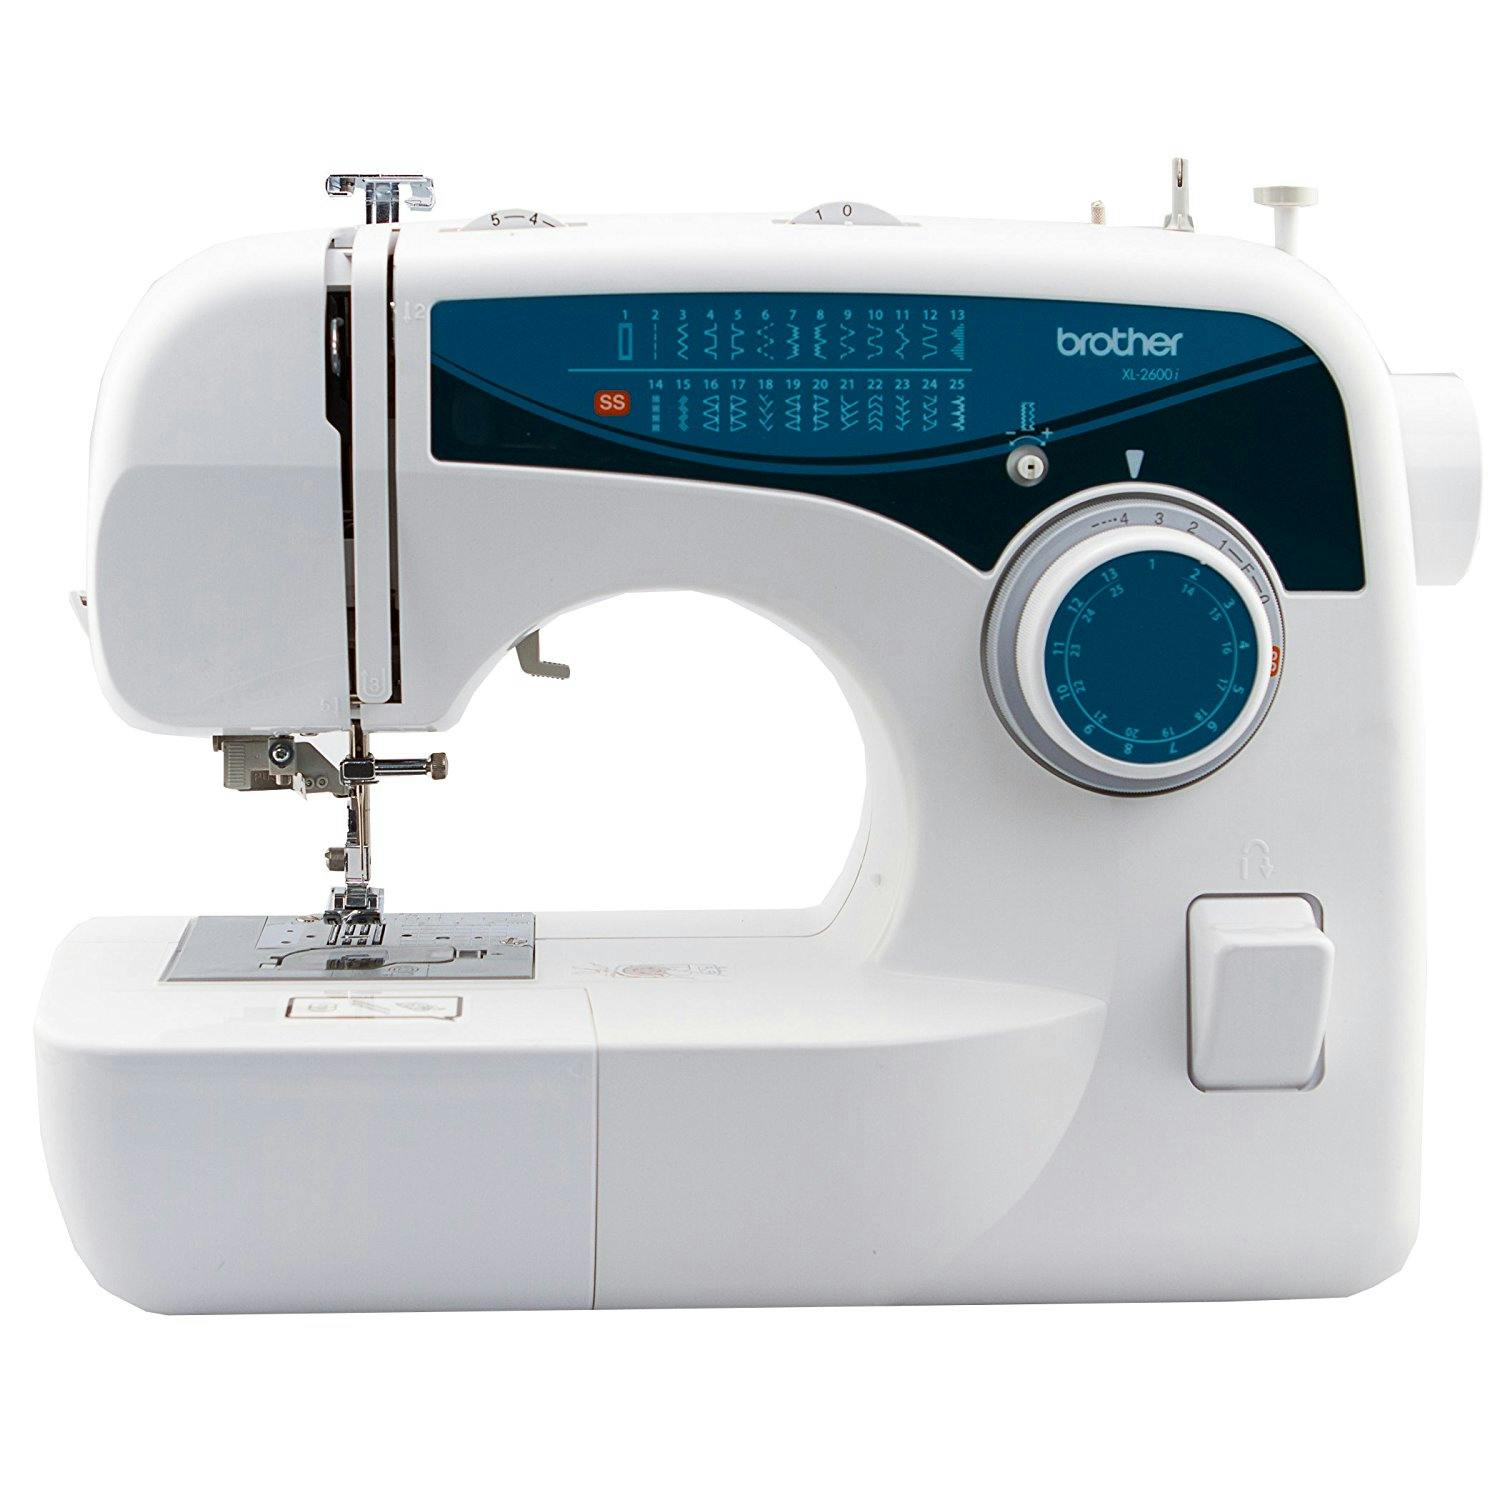 Brother XL2600i Parts list.  Brother sewing machines, Sewing, Sewing  machine